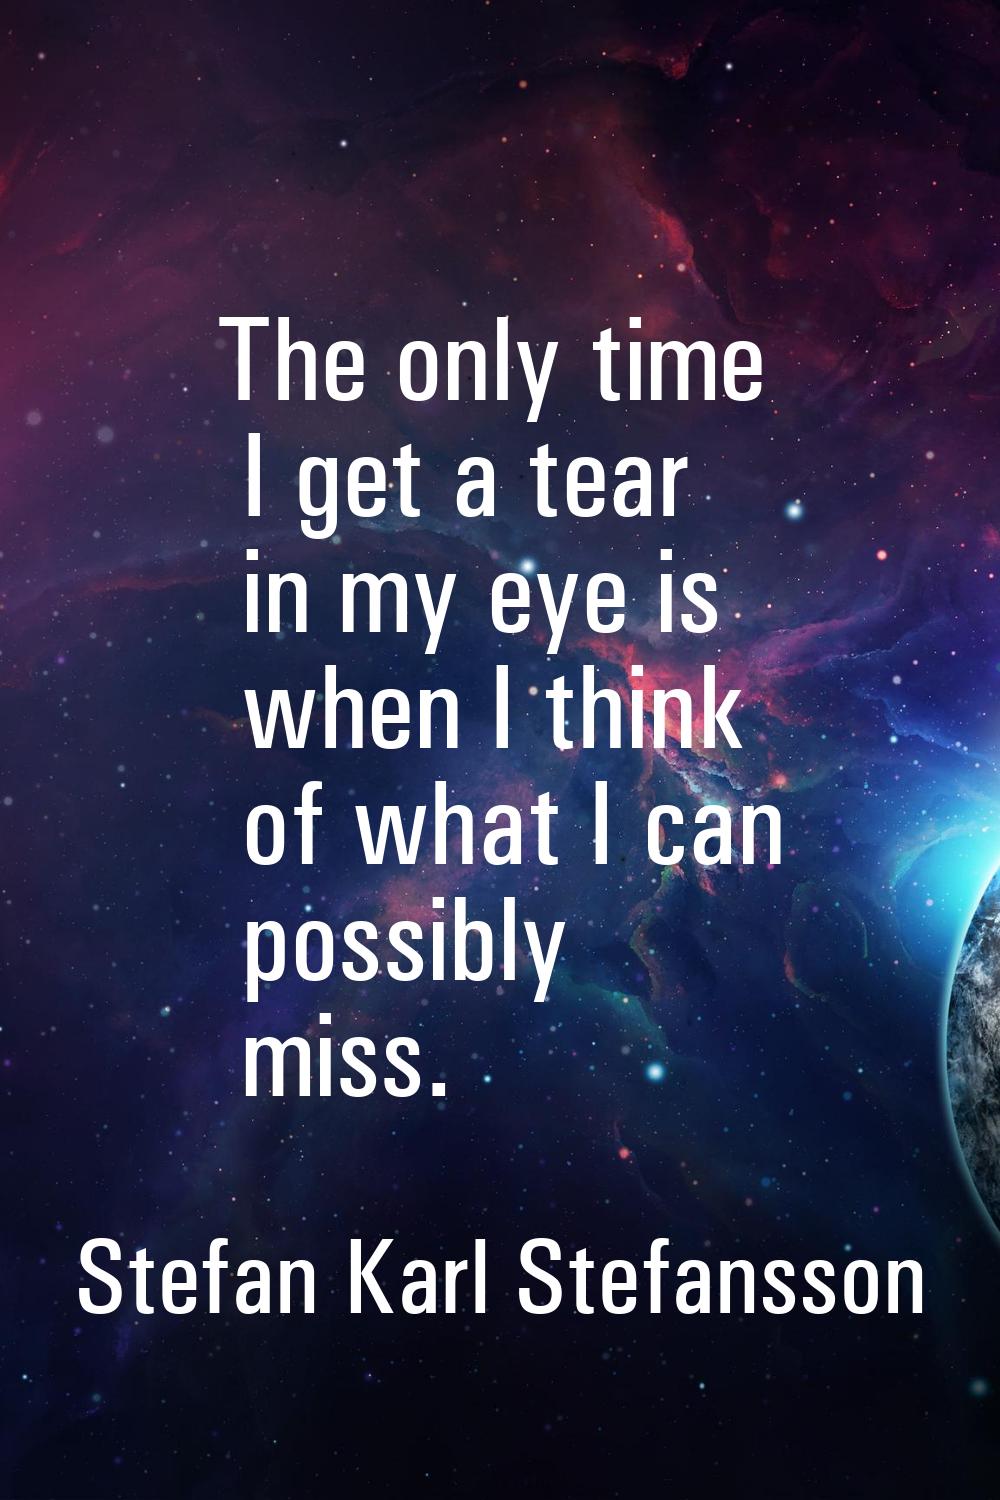 The only time I get a tear in my eye is when I think of what I can possibly miss.